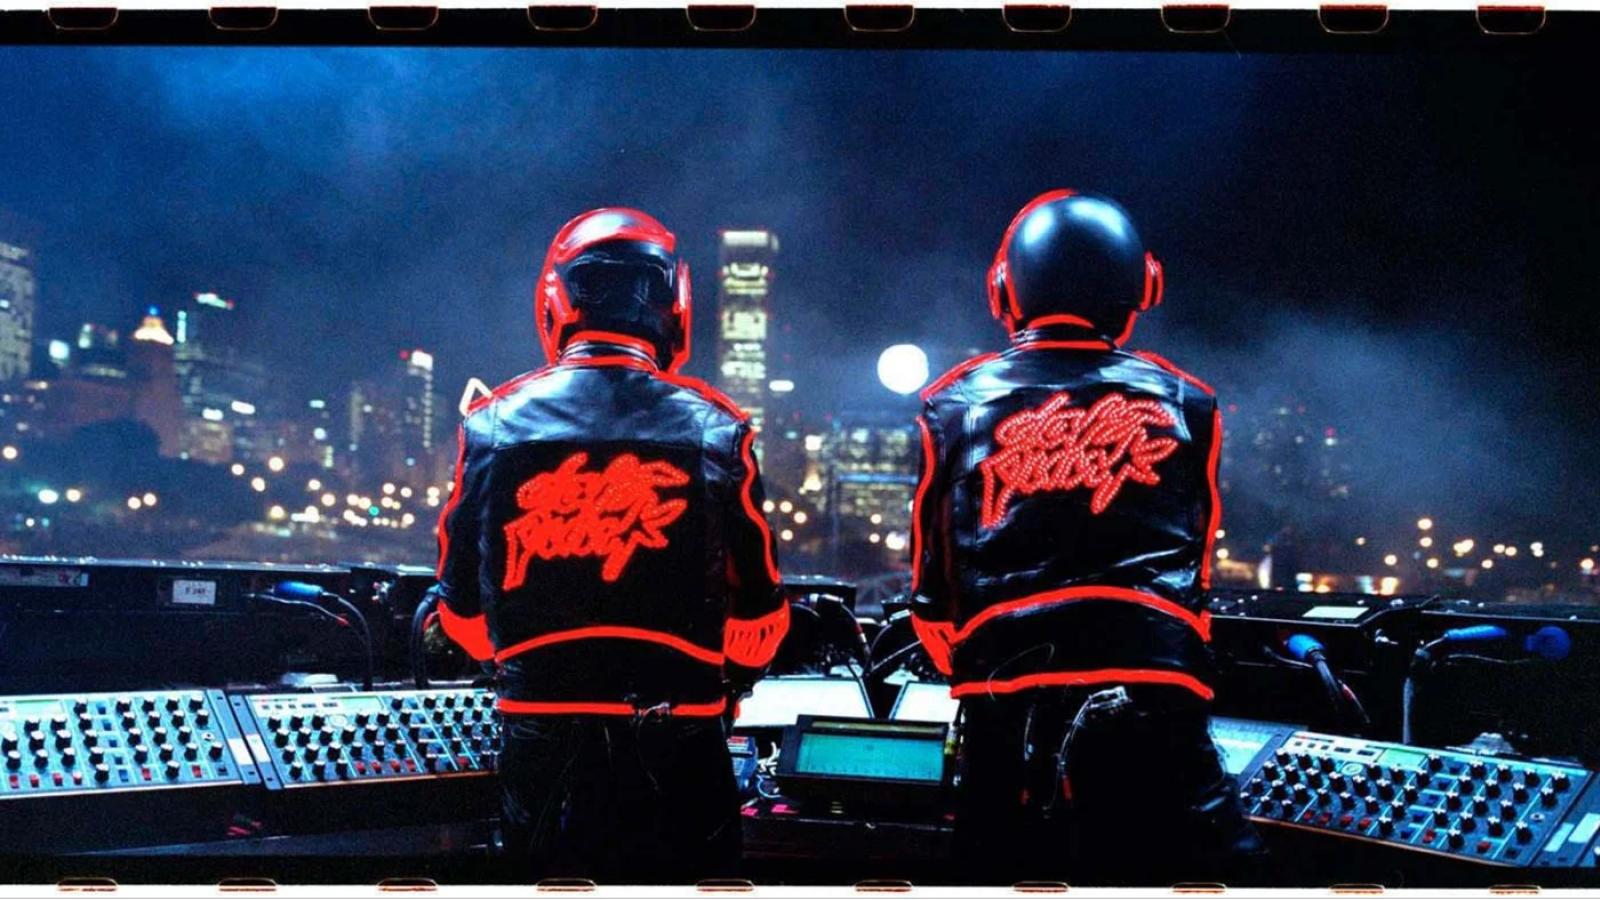 Photo of the band members backs with jackets with daft punk written on the back in front of a console with a city scape in view